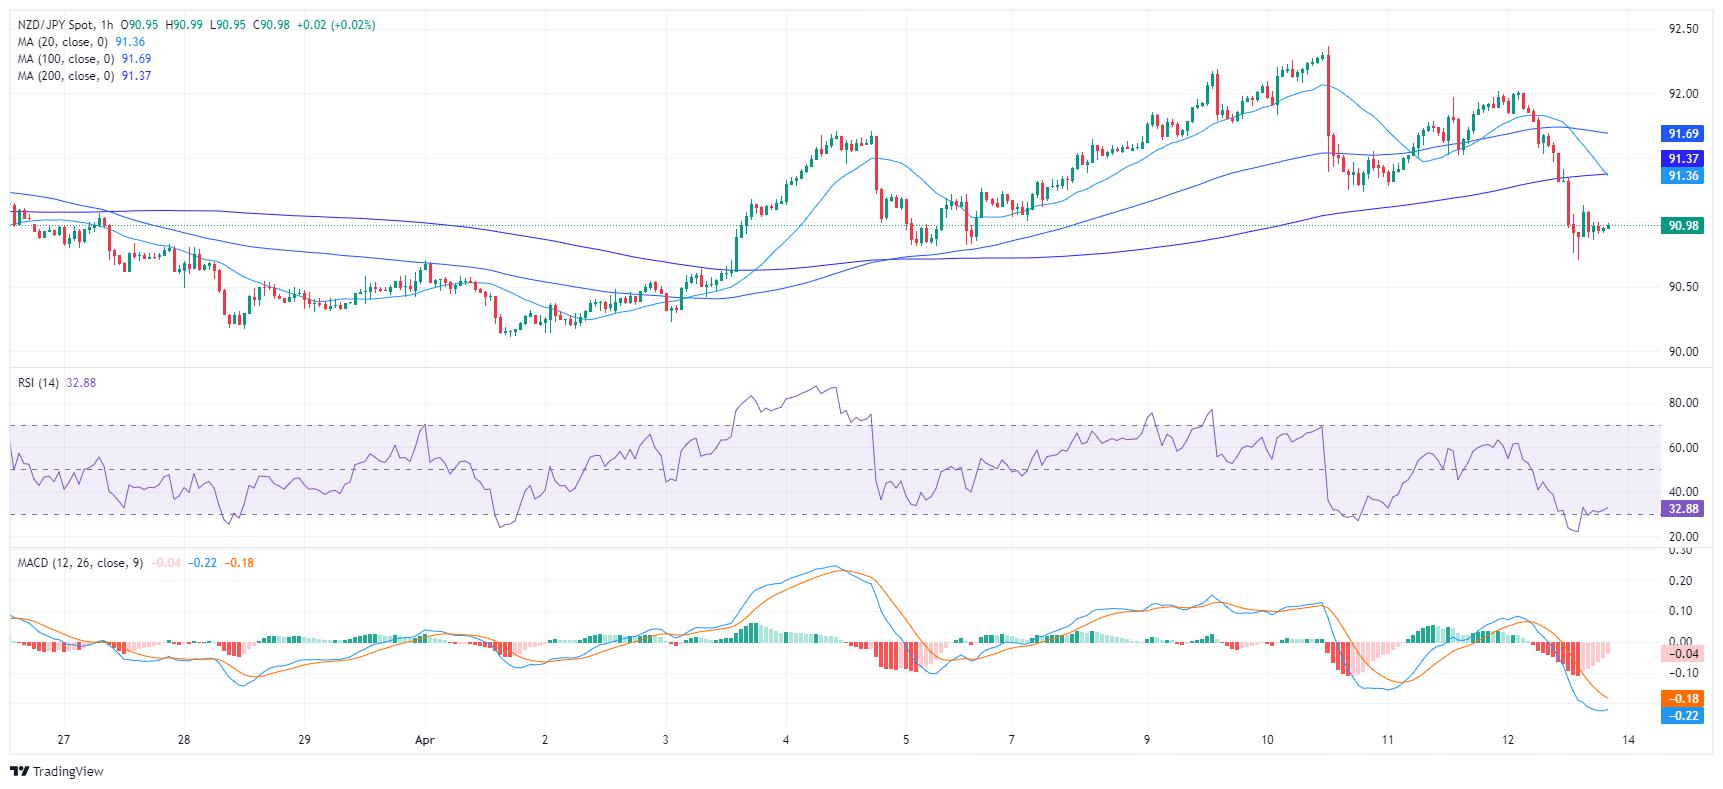 NZD/JPY Price Analysis: Negative momentum gains traction, broader outlook still positive